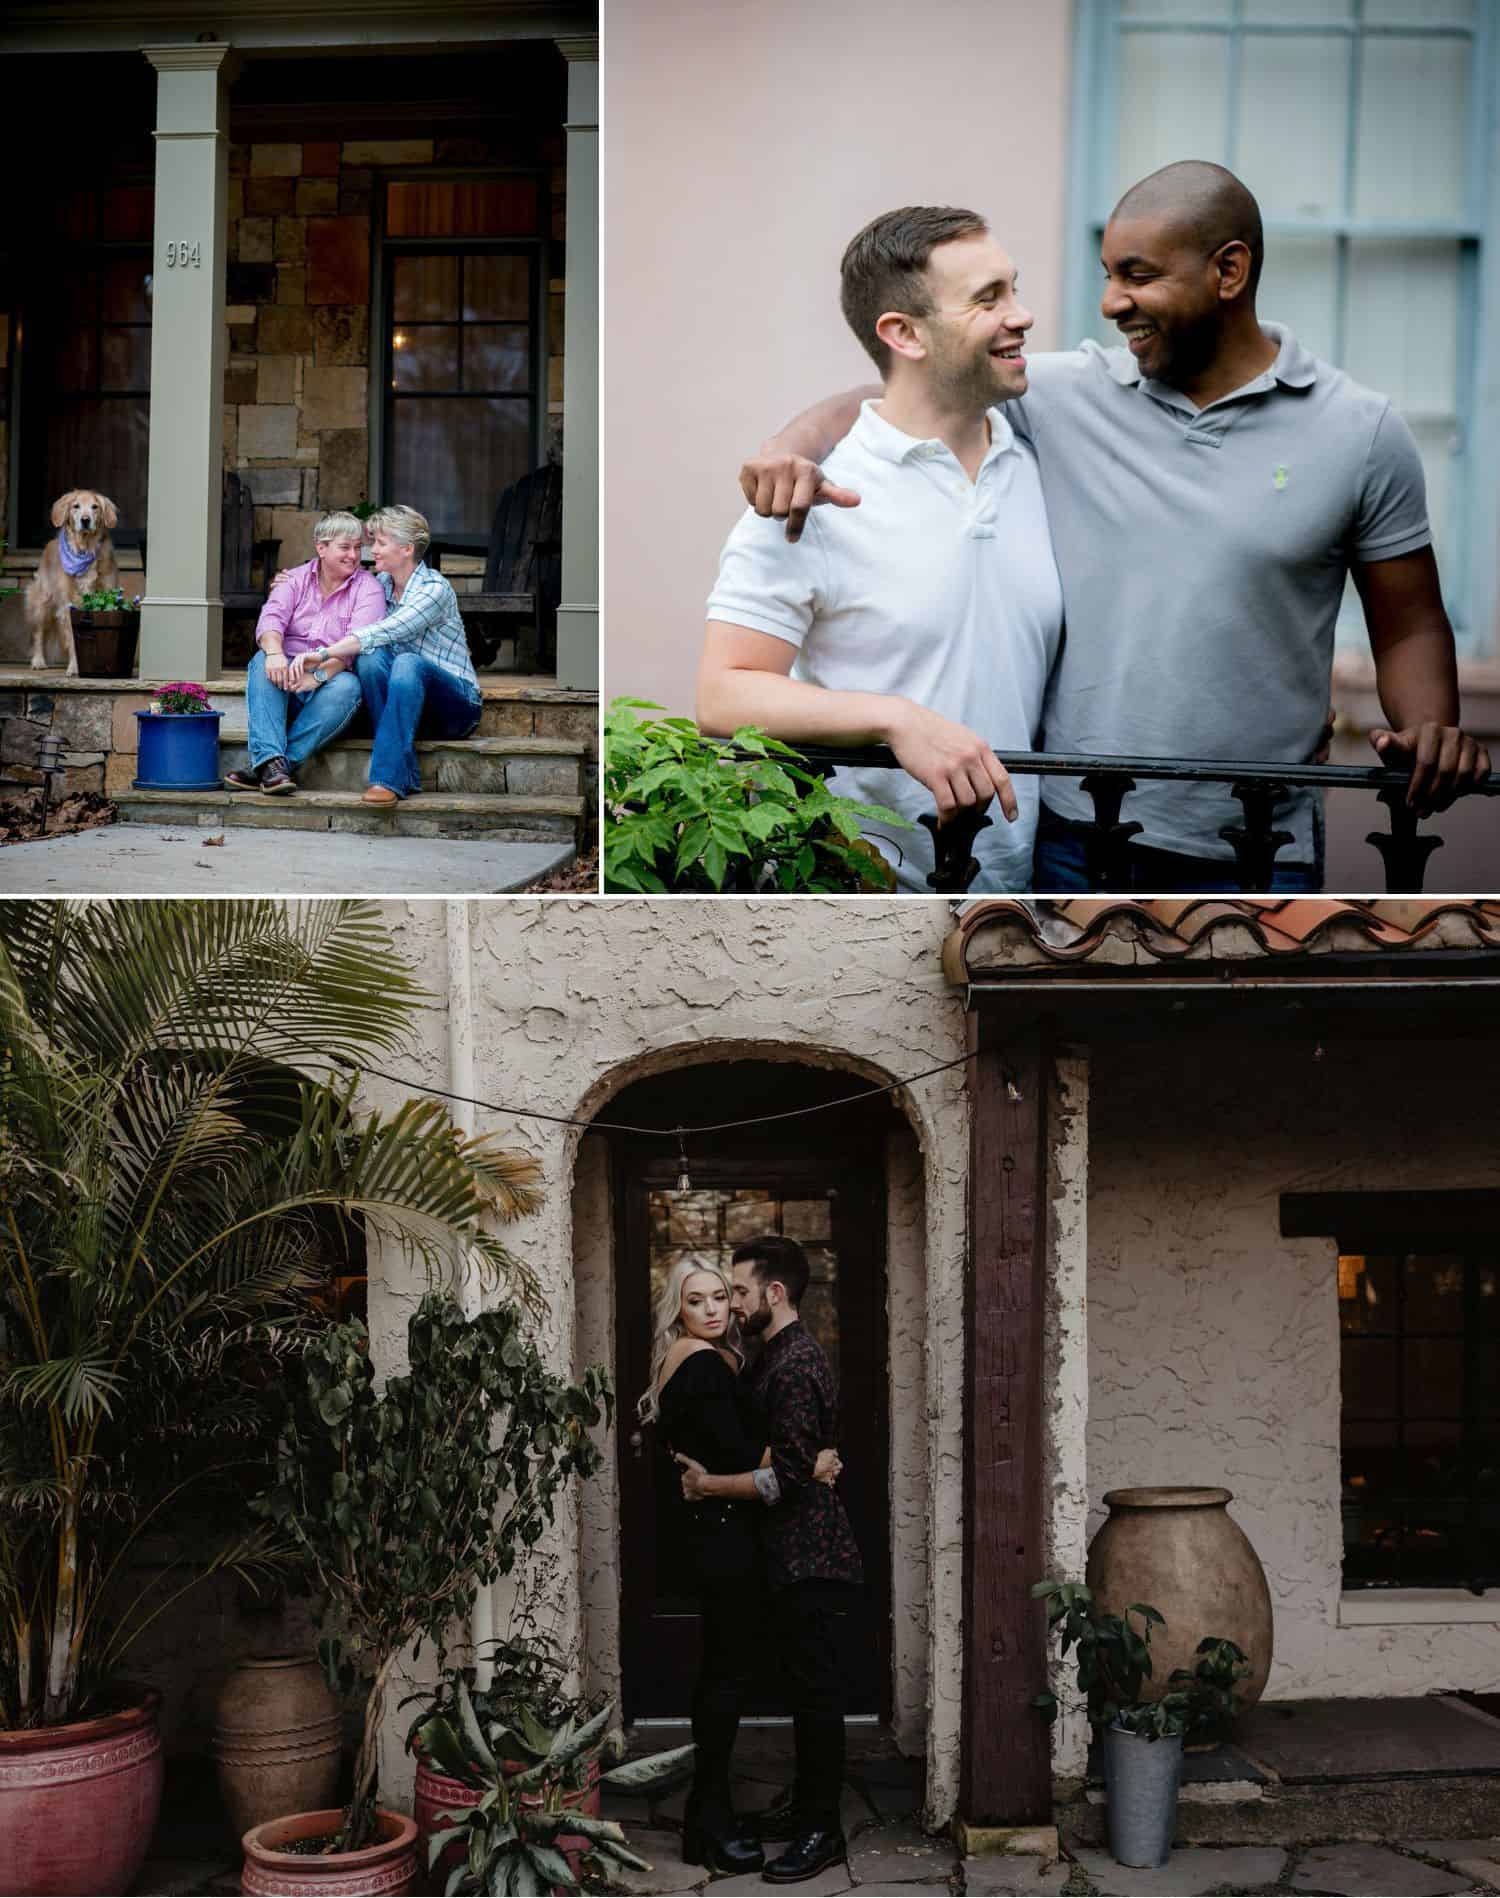 Photograph engaged couples in front of their home to commemorate their first home together